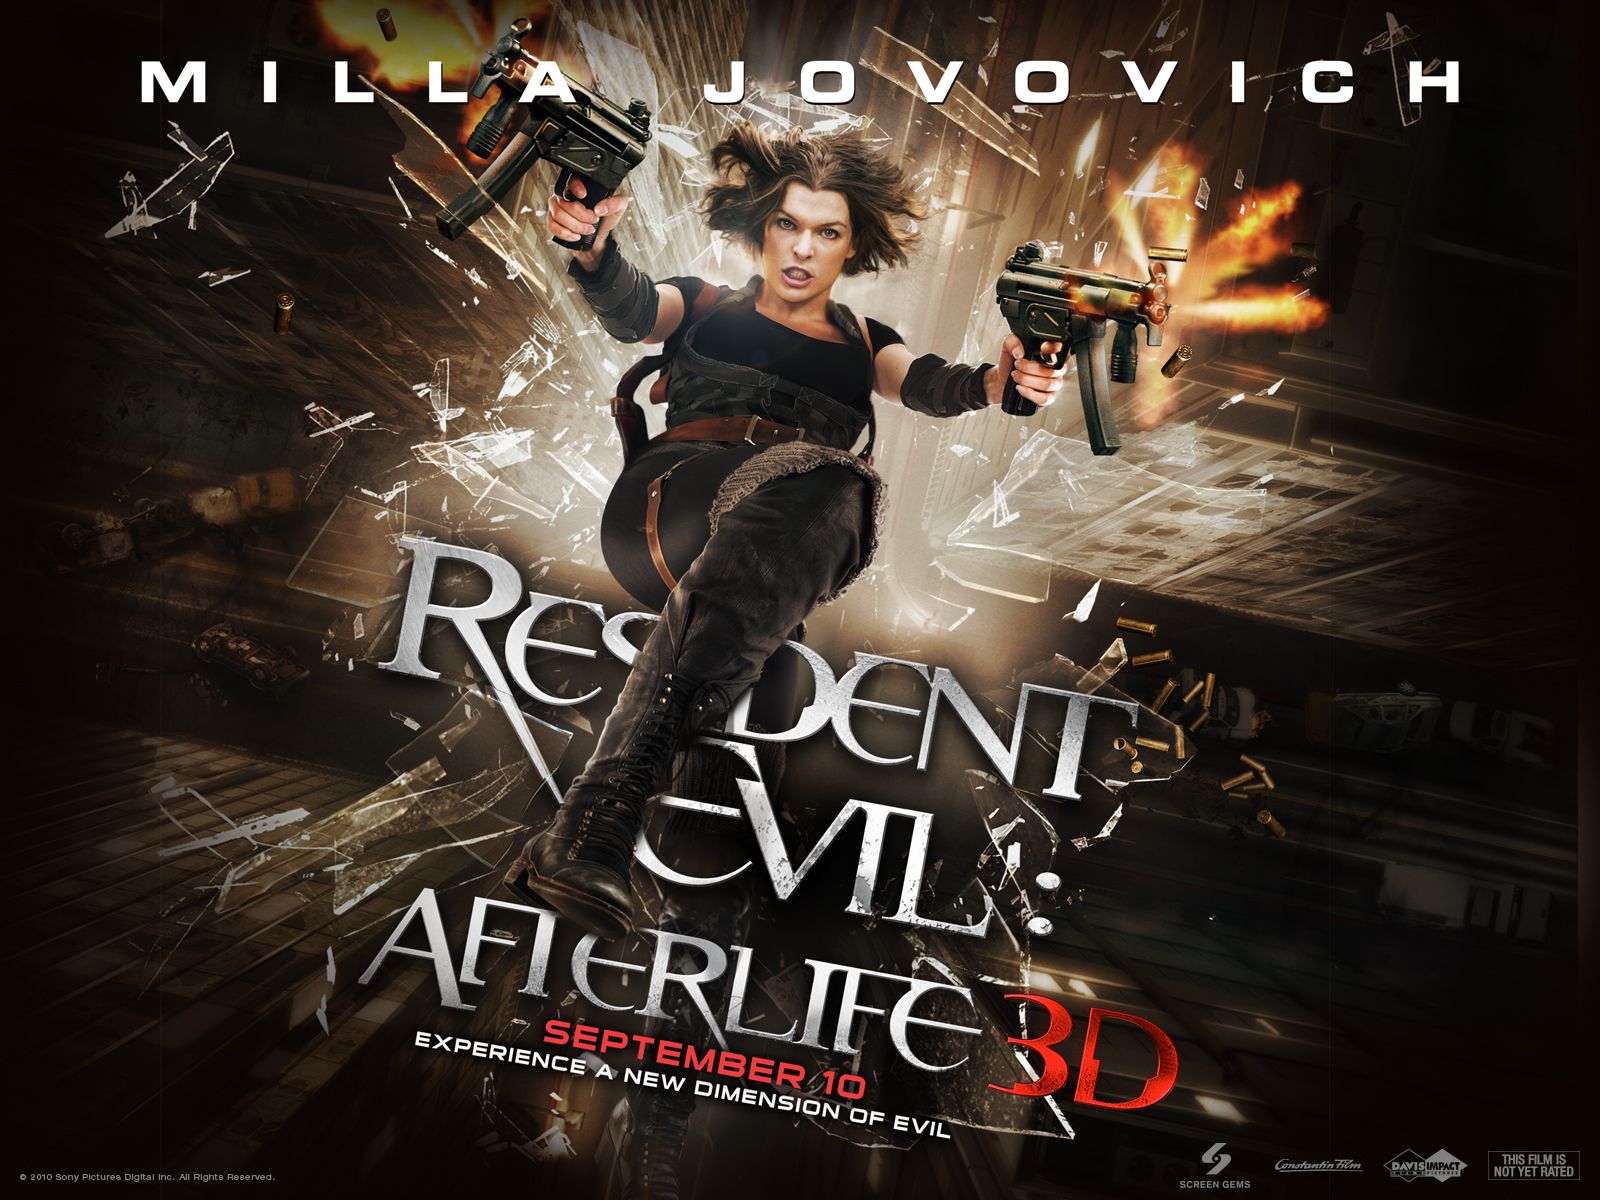 Resident Evil Afterlife Exclusive Wallpaper Movie